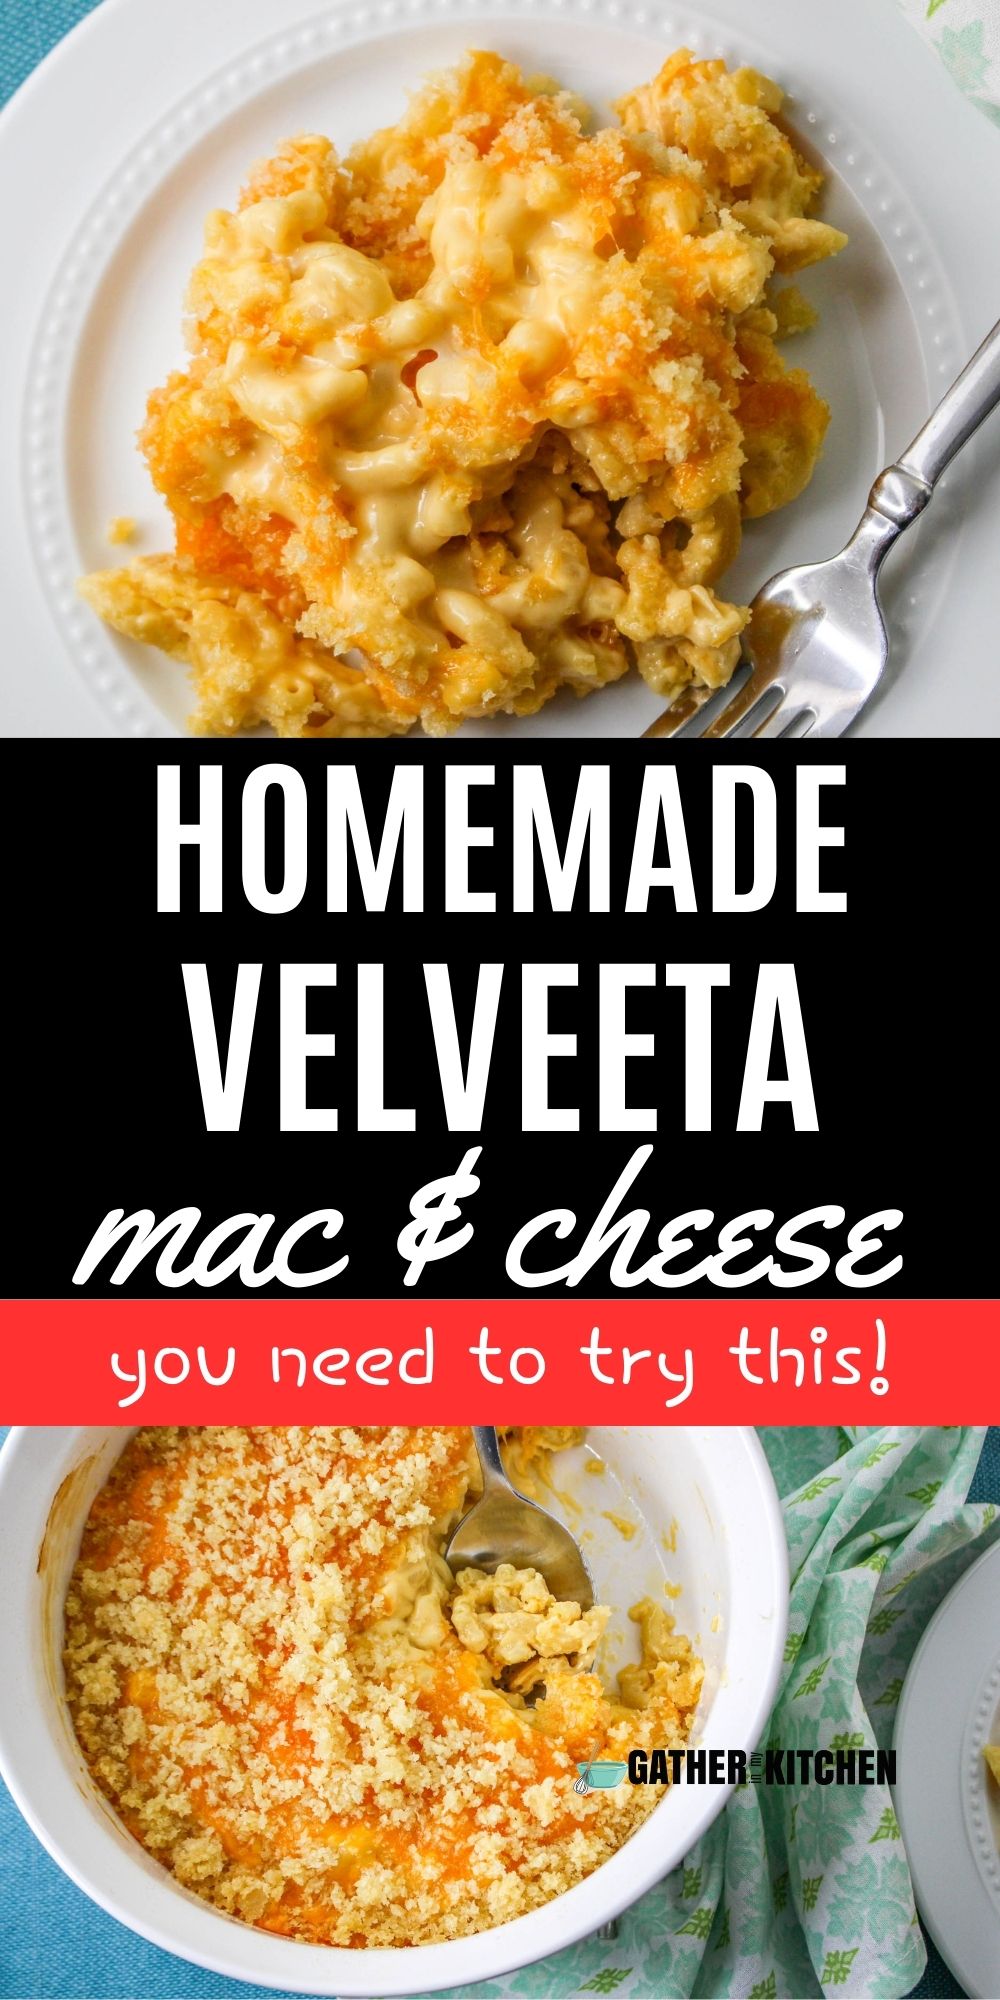 Pin image: top is a plate of mac & cheese, middle says "Homemade Velveeta Mac & Cheese you need to try this!" and bottom is a dish with mac & cheese with a portion taken out.